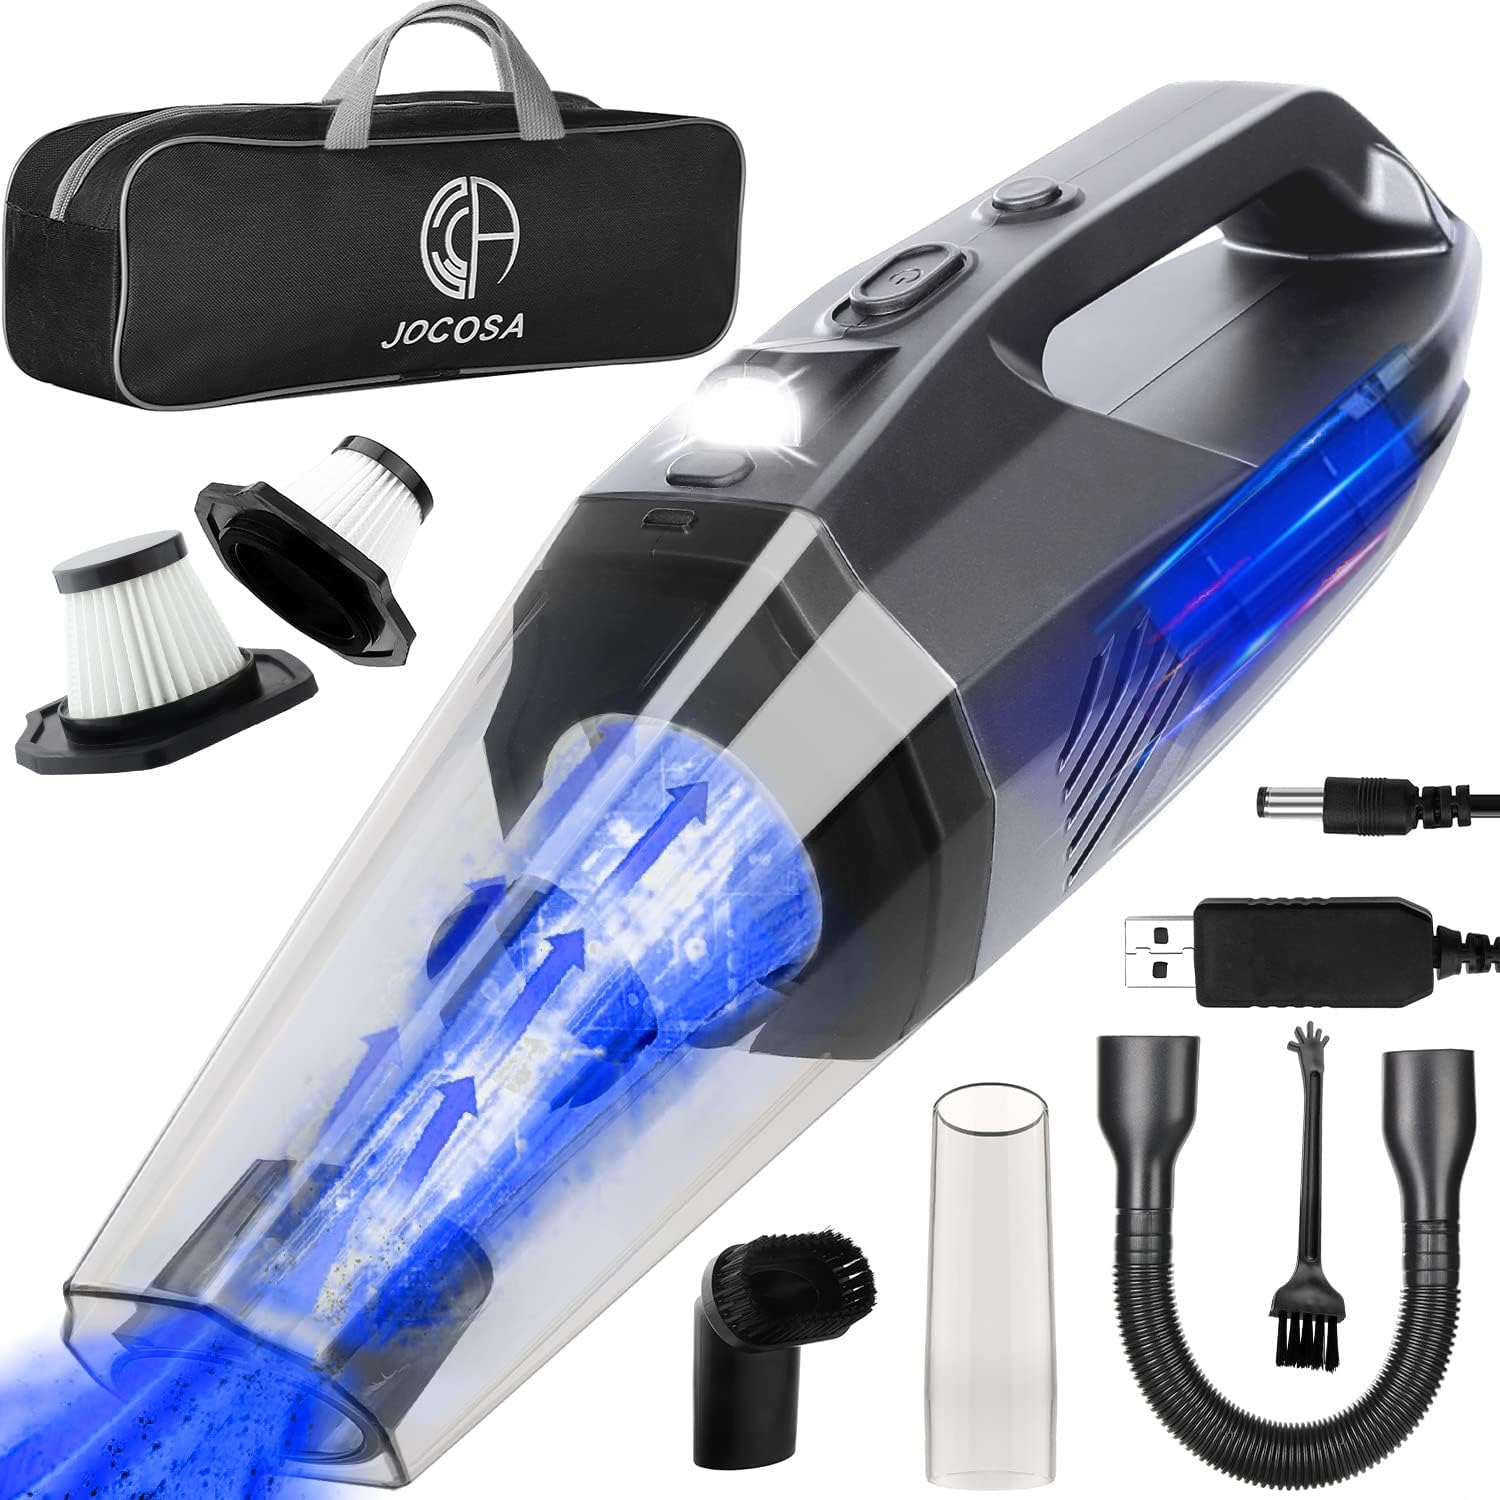 JOcOSA Handheld Vacuum 8000PA,High Power Portable Car Vacuum, USB Charging Dust Busters Cordless Rechargeable with Led Light for car/H